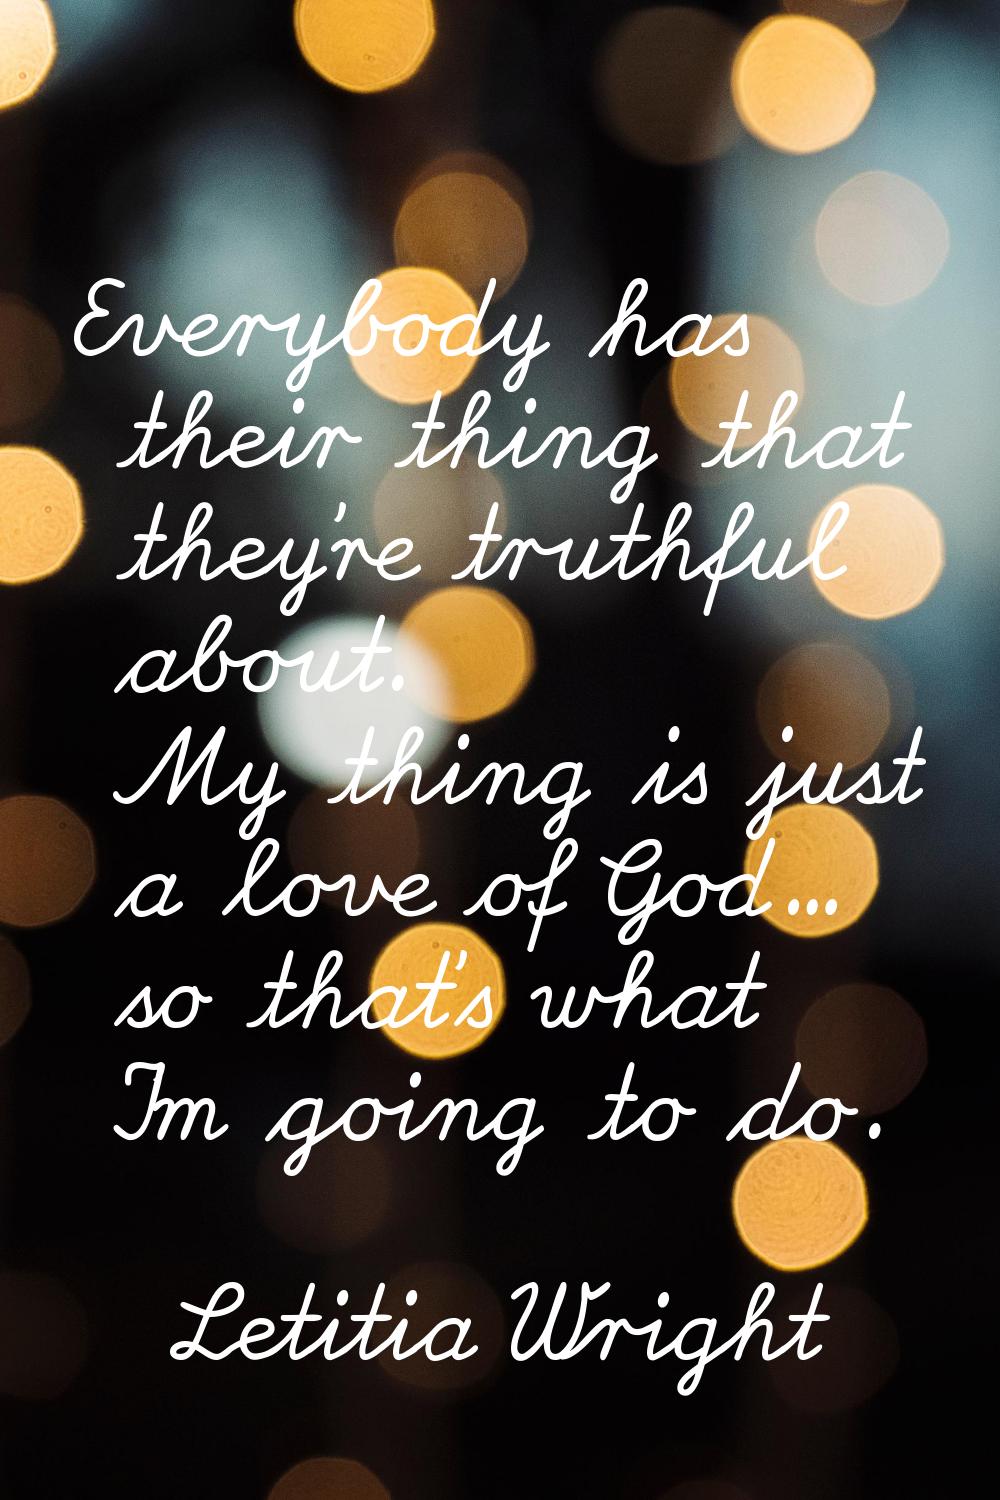 Everybody has their thing that they're truthful about. My thing is just a love of God... so that's 